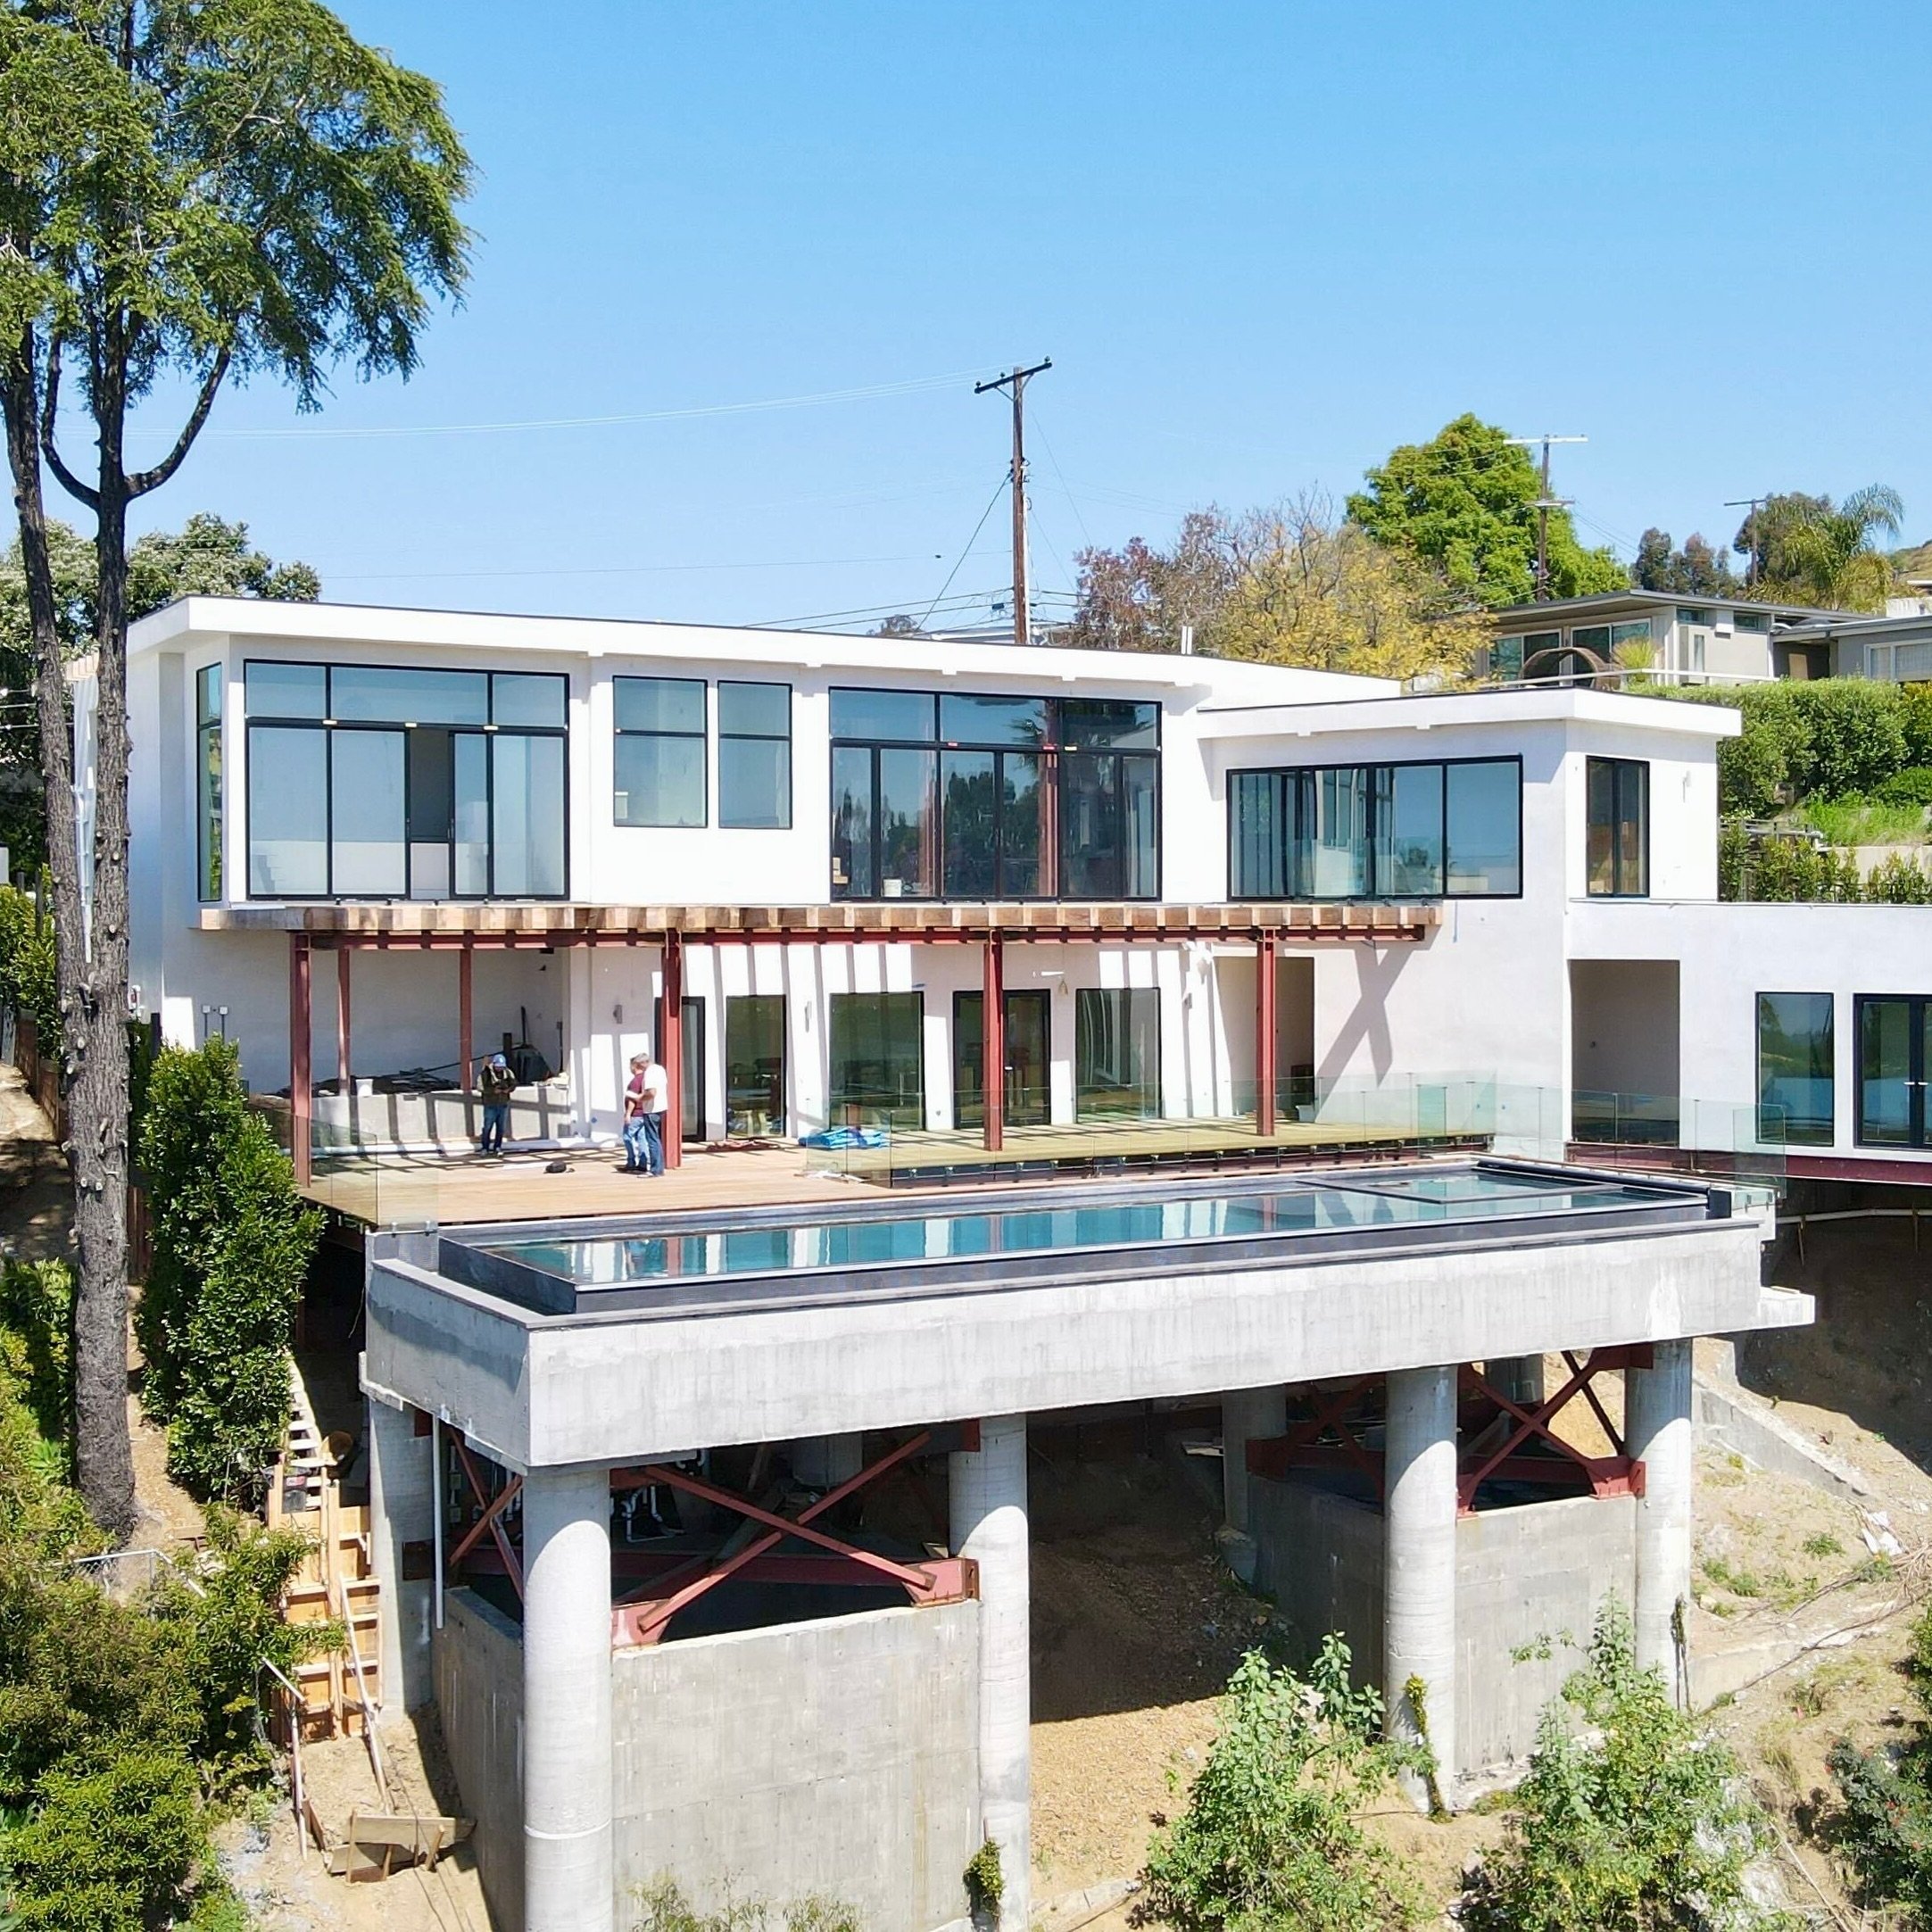 Almost complete, one of our cooler projects is a major renovation of an existing single family home in the hills of Los Angeles. Pretty straightforward. Just 40 structural piles, some 70ft deep, and a little pool for dipping your toes on a summer nig